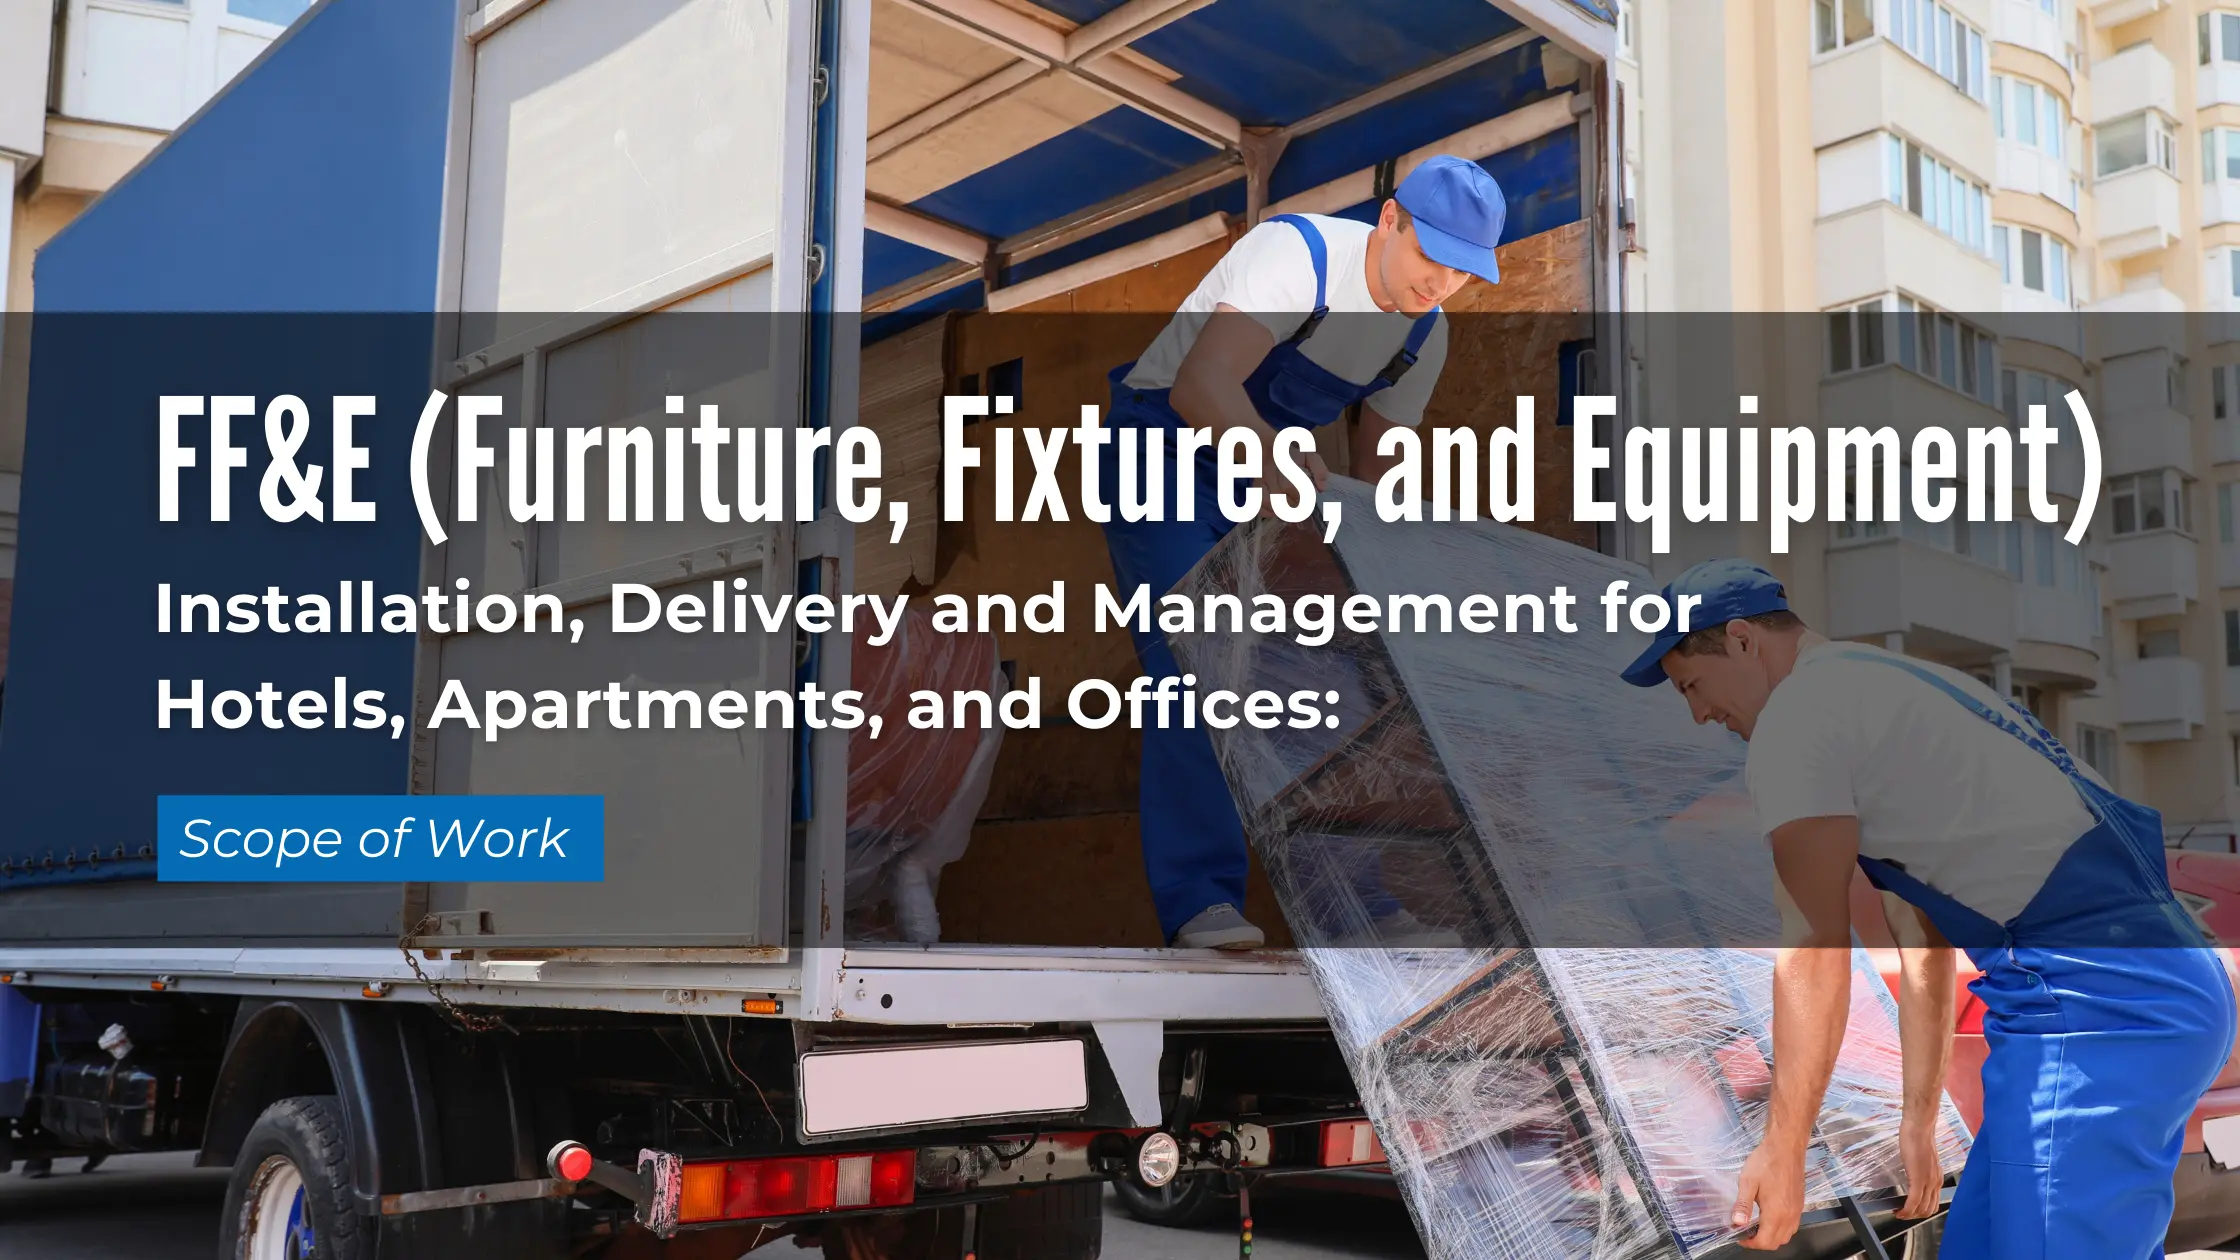 FF&E (Furniture, Fixtures, and Equipment) Installation, Delivery and Management for Hotels, Apartments, and Offices